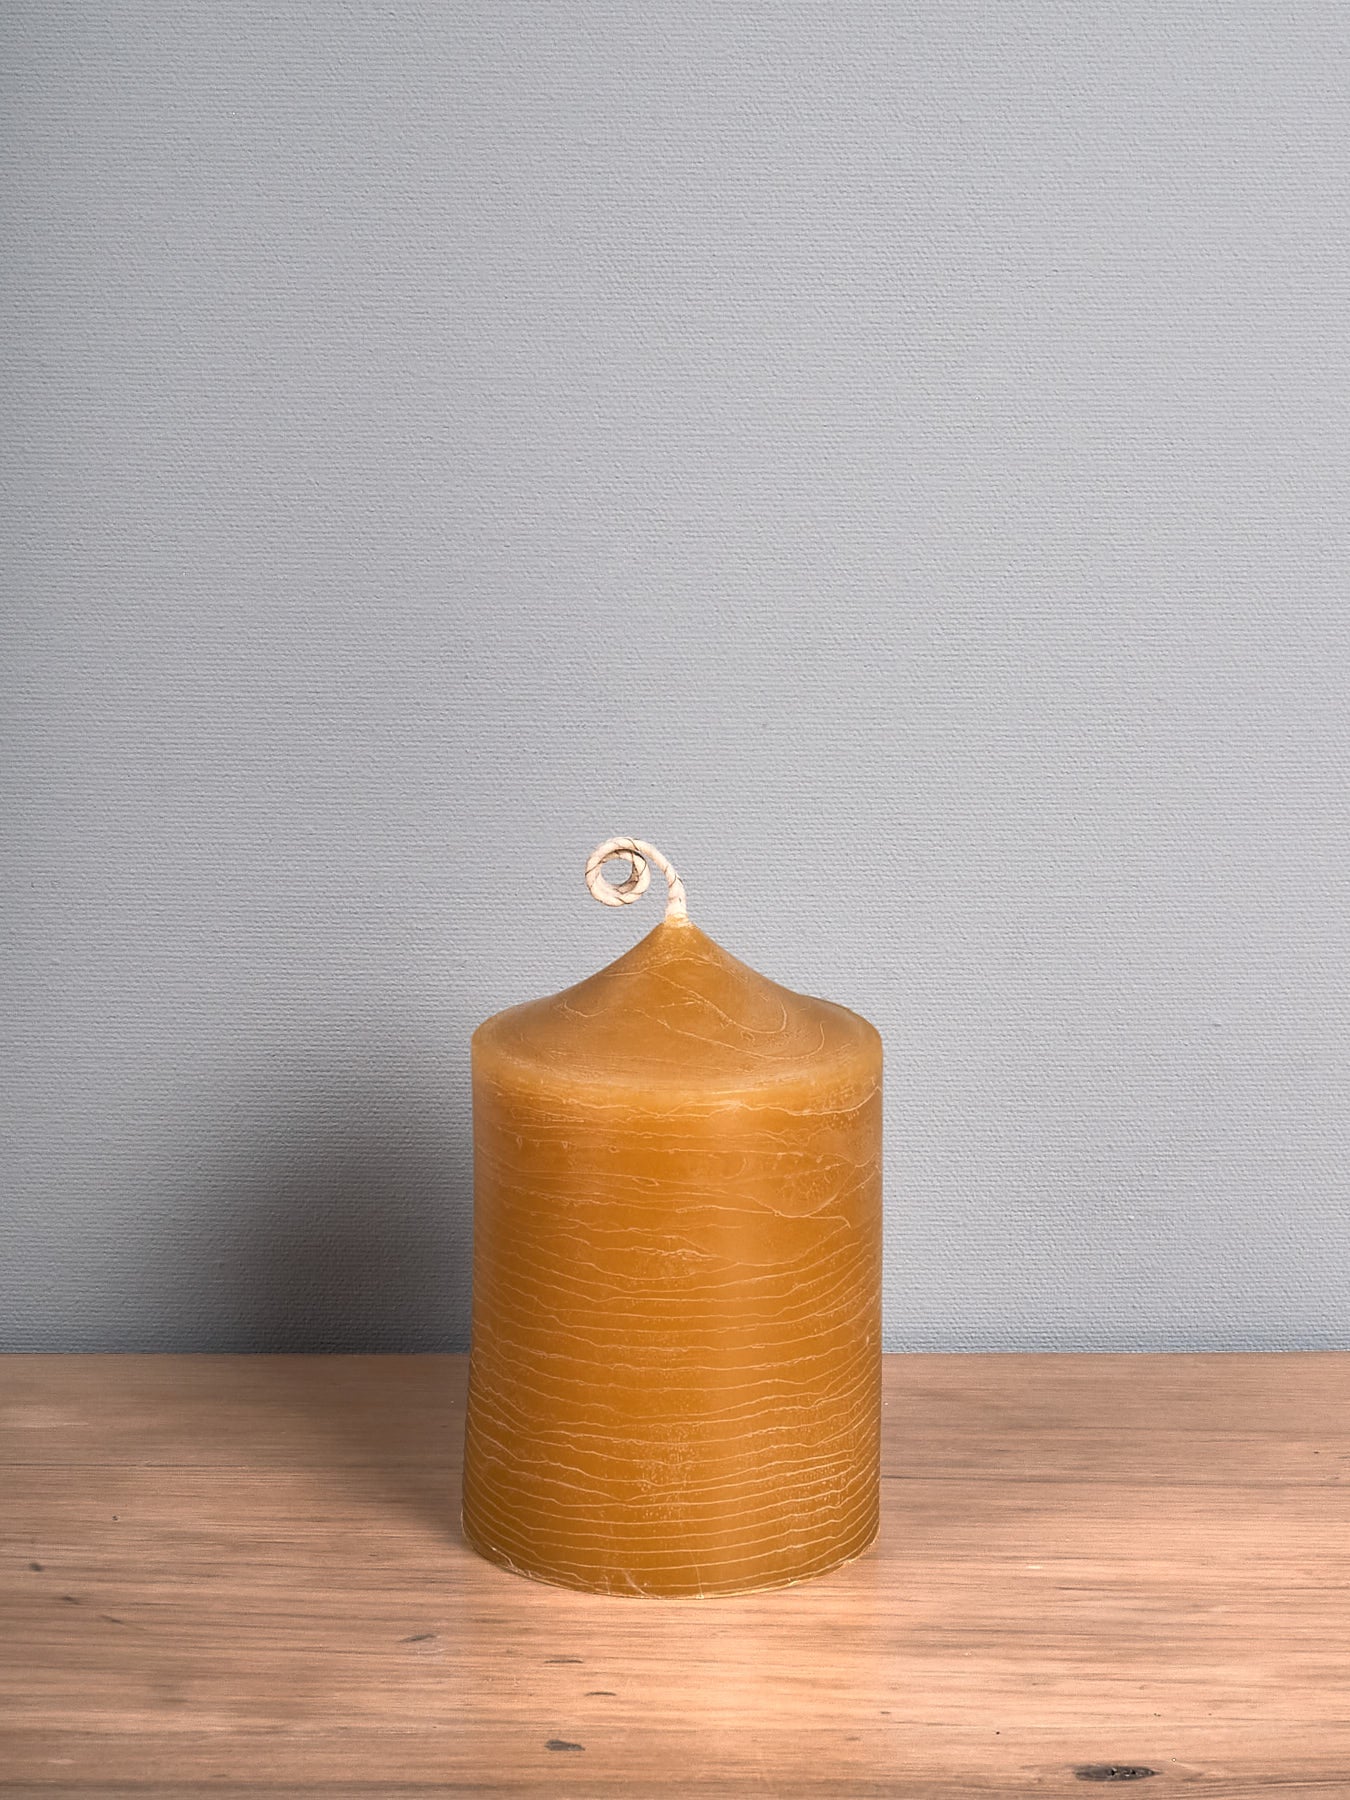 A yellow Cafe Candle – Fat sitting on a wooden table made by Hohepa Candles.